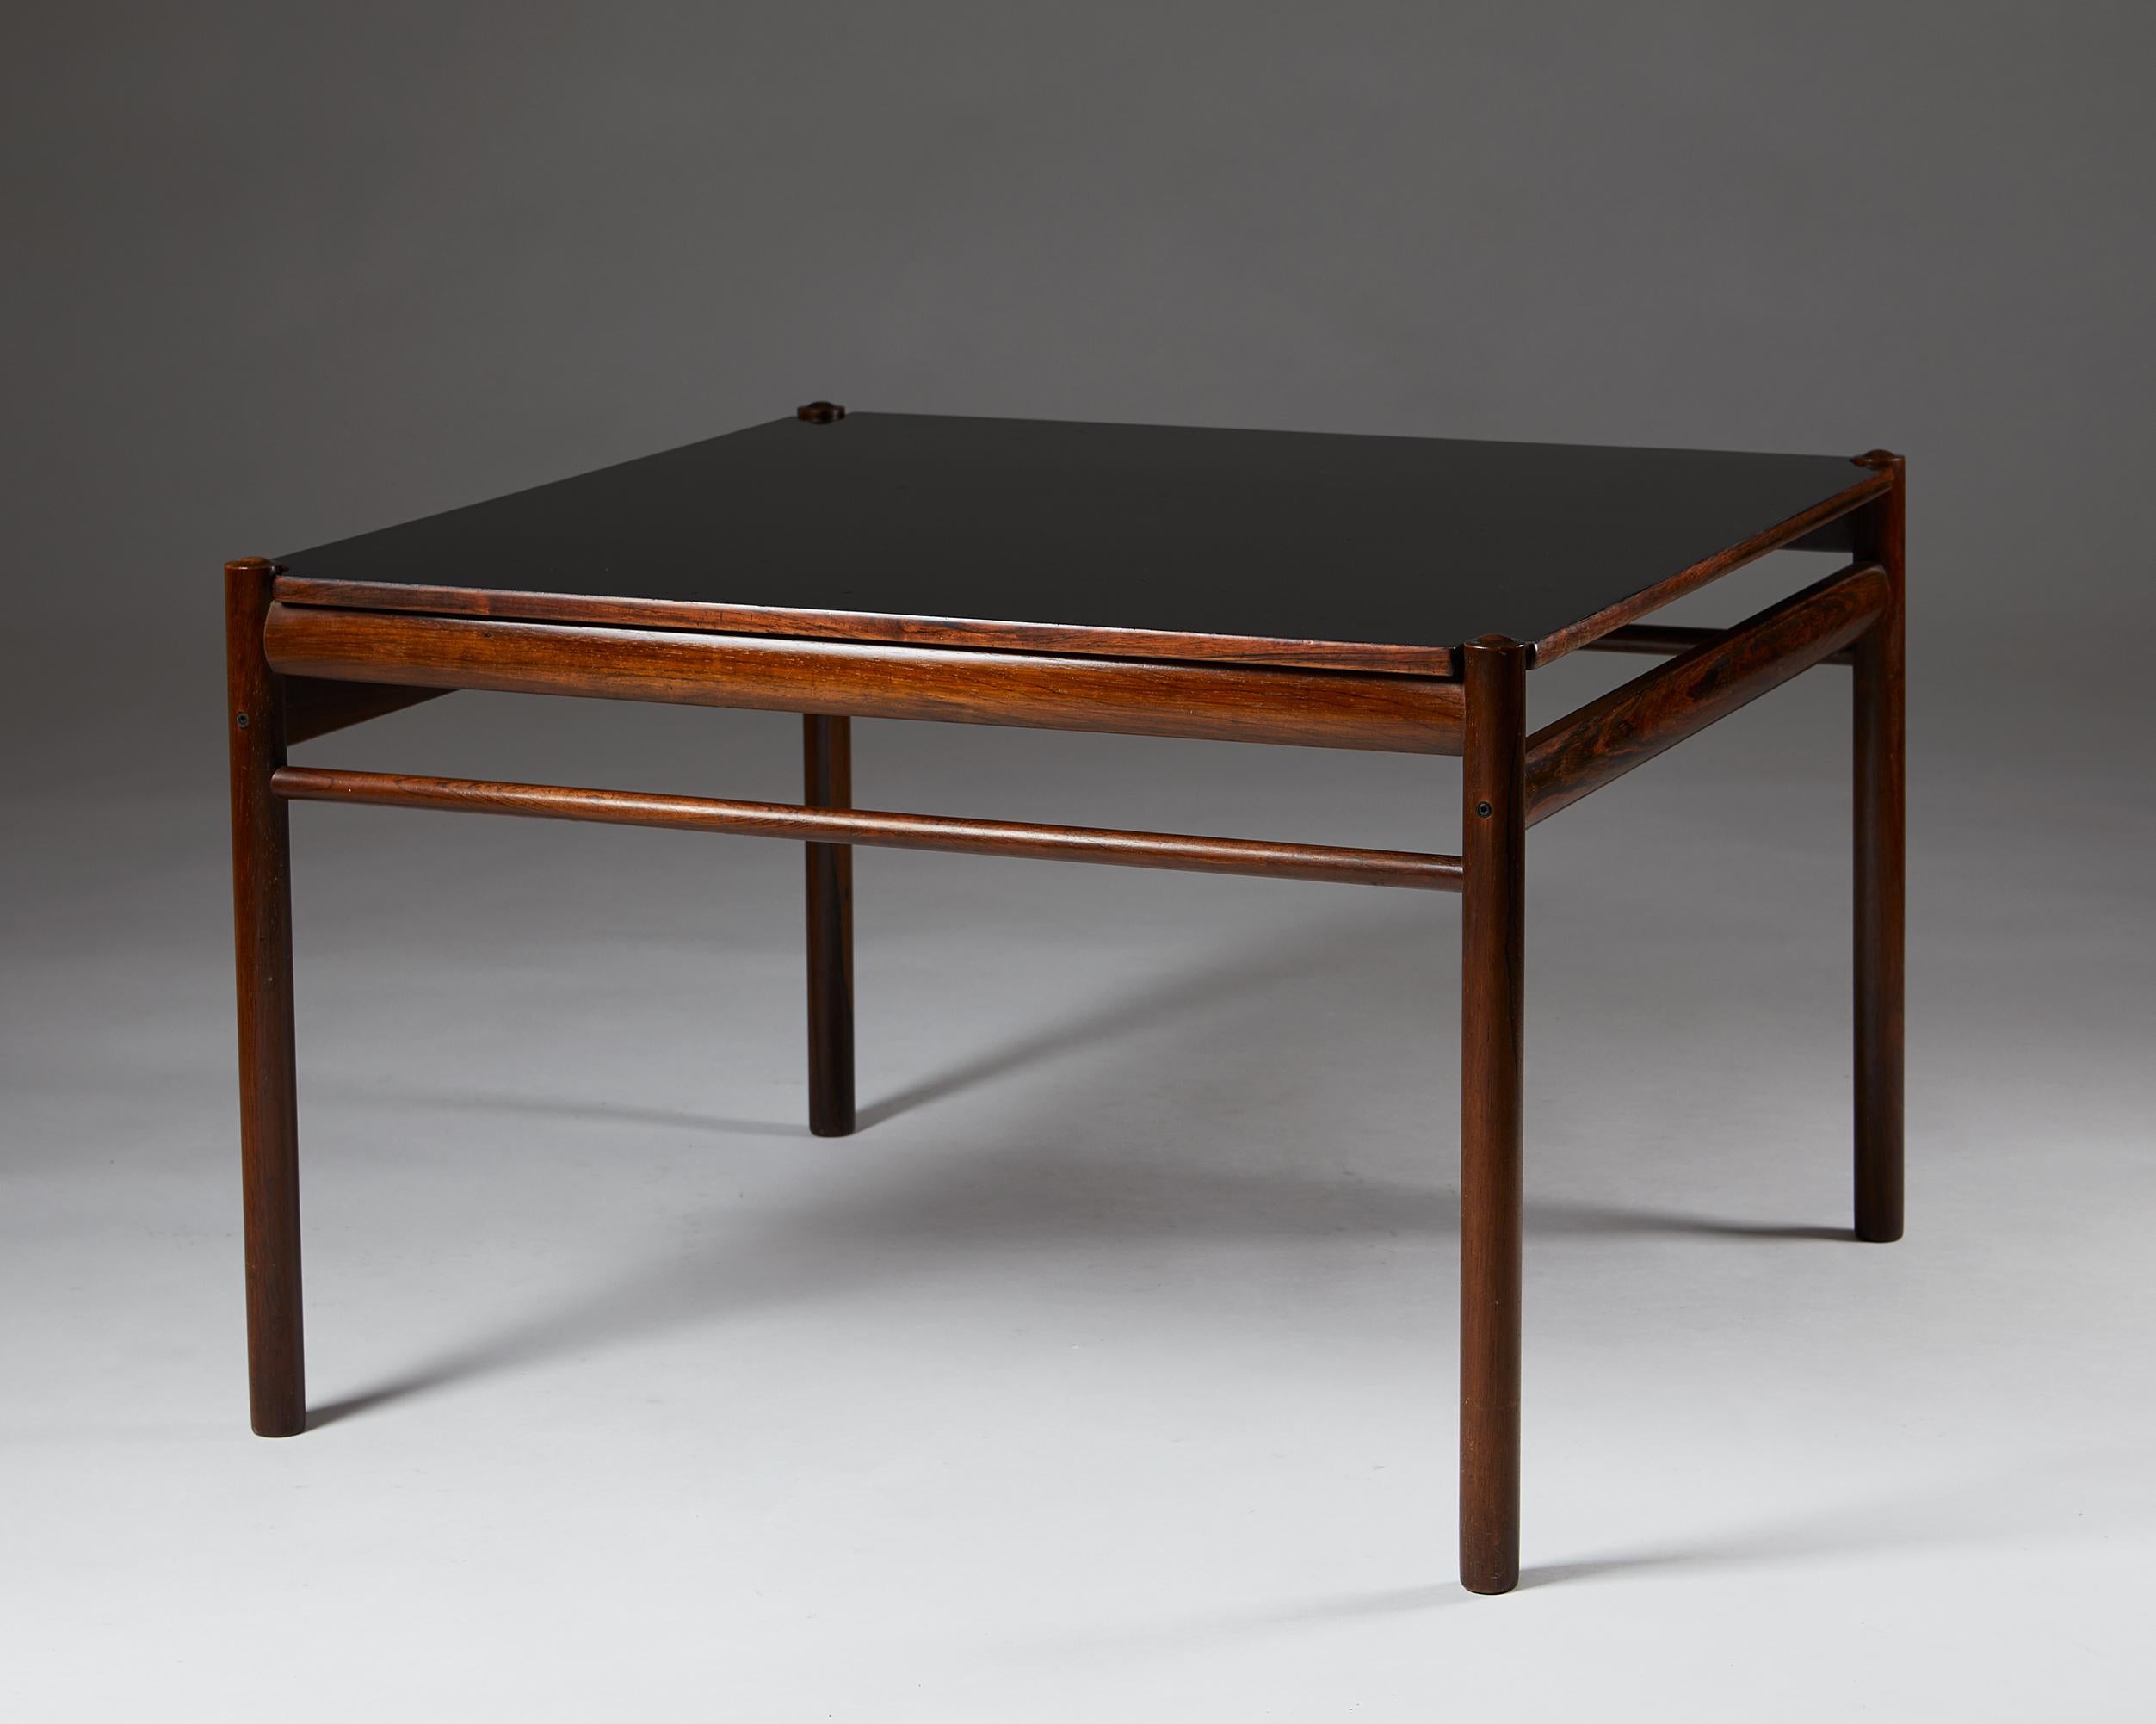 Scandinavian Modern Occasional Table “Colonial” Designed by Ole Wanscher for P. Jeppesen